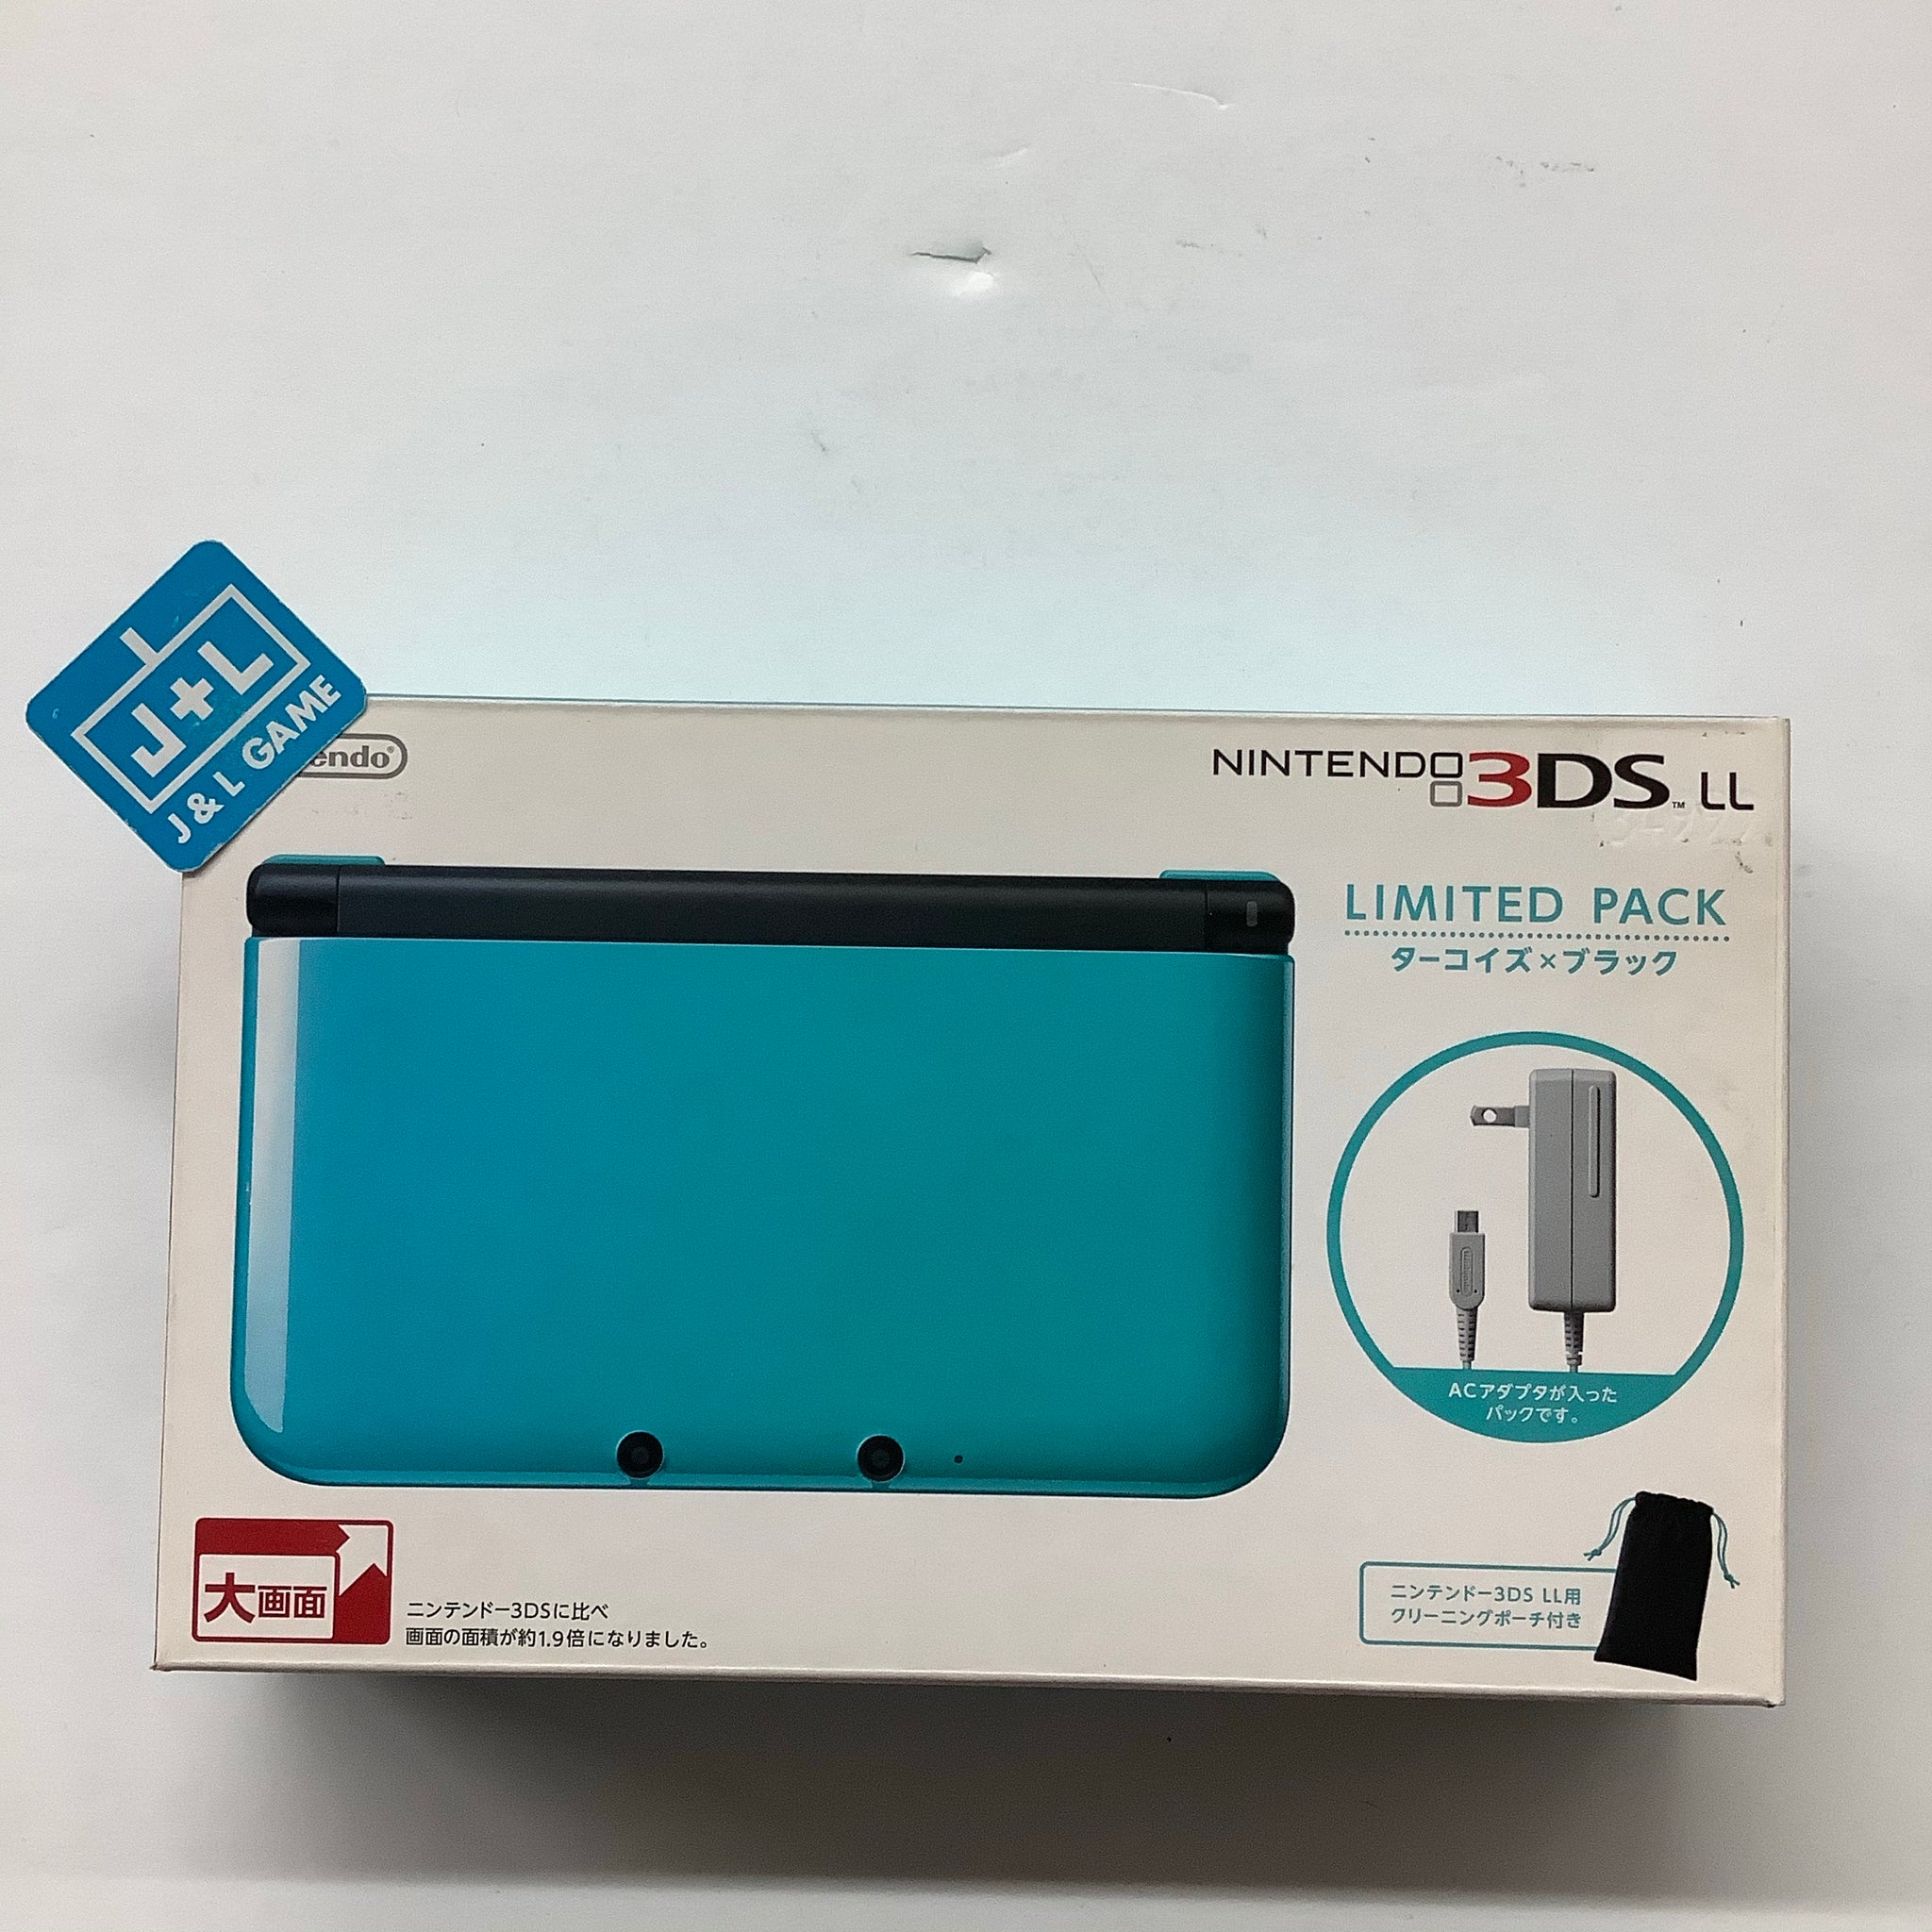 Nintendo 3DS LL Limited Pack Turquoise X Black - Nintendo 3DS ...